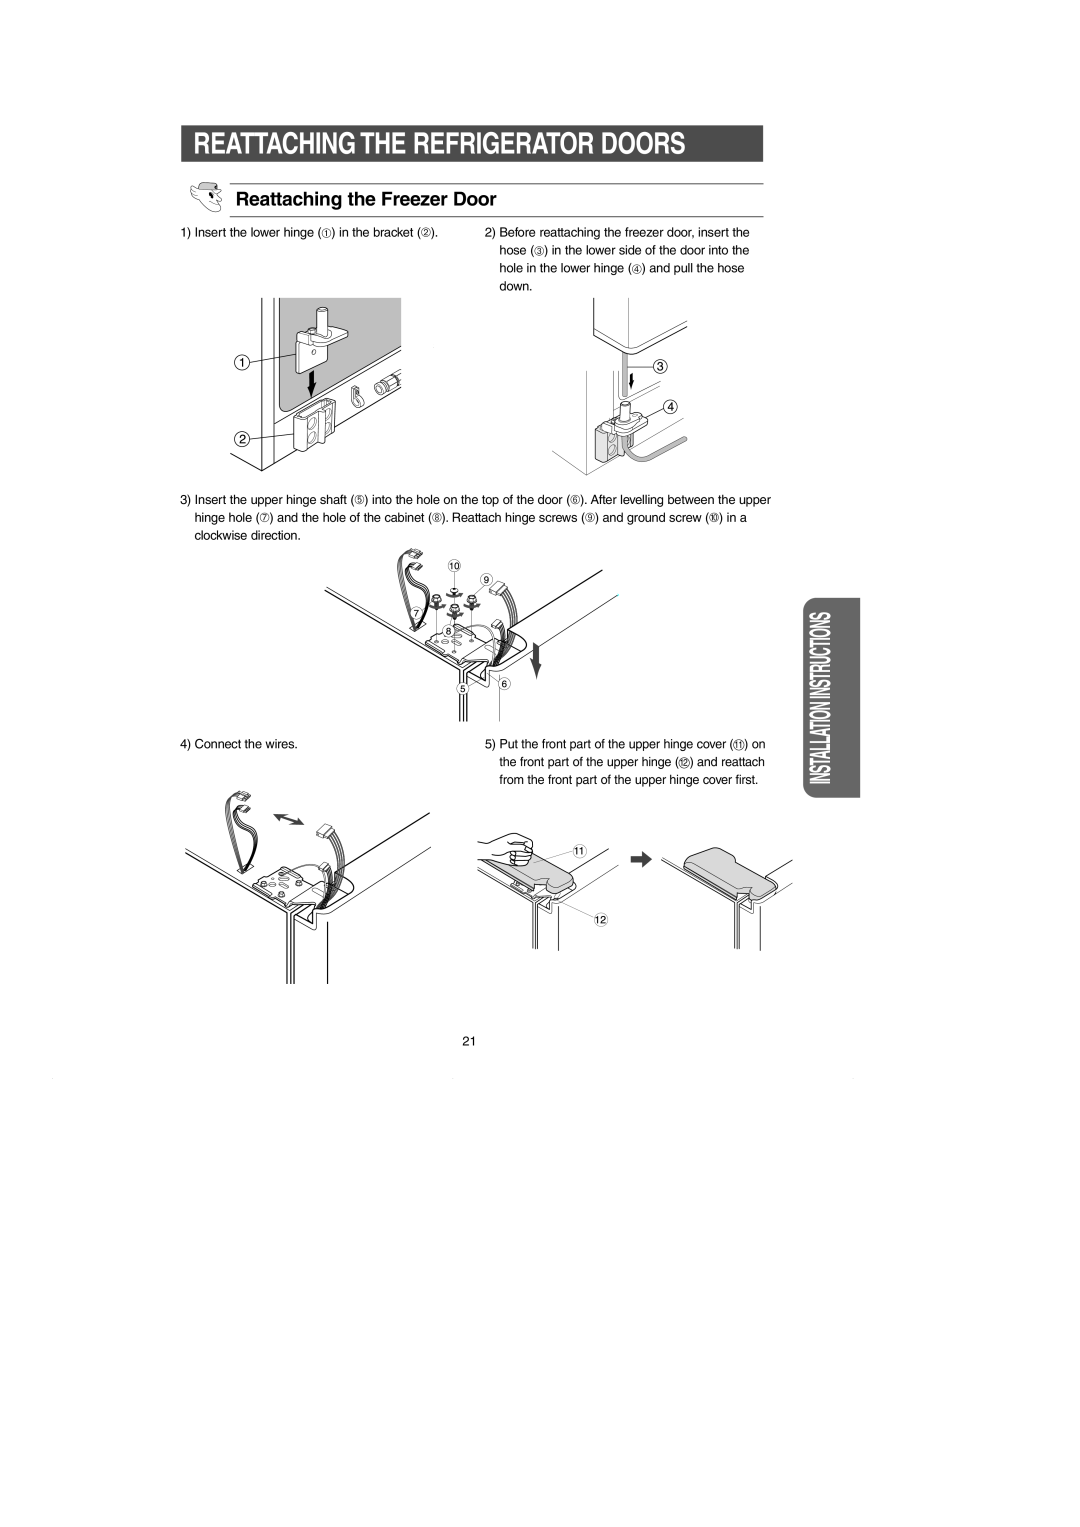 Samsung RH269LBSH owner manual Reattaching The Refrigerator Doors, Reattaching the Freezer Door, Installation Instructions 